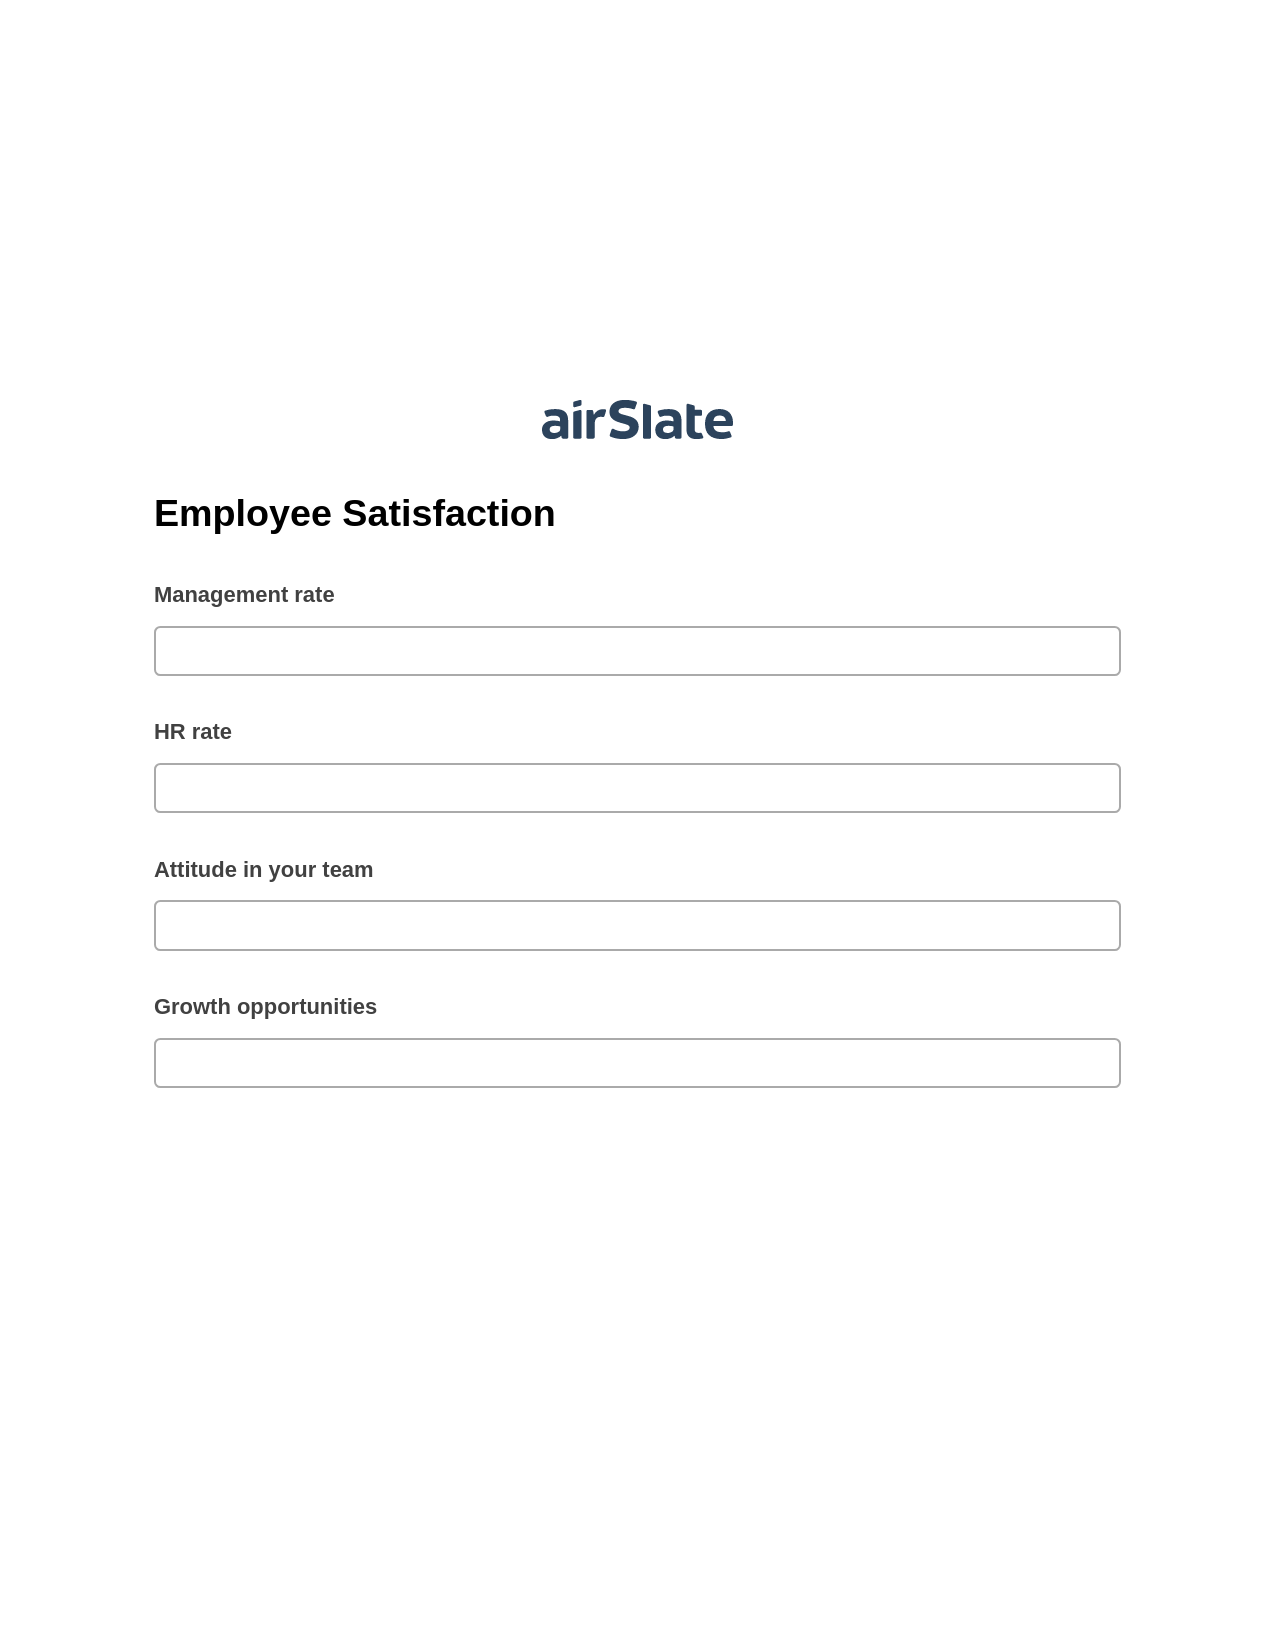 Employee Satisfaction Pre-fill Dropdowns from CSV File Bot, Roles Reminder Bot, Export to NetSuite Record Bot